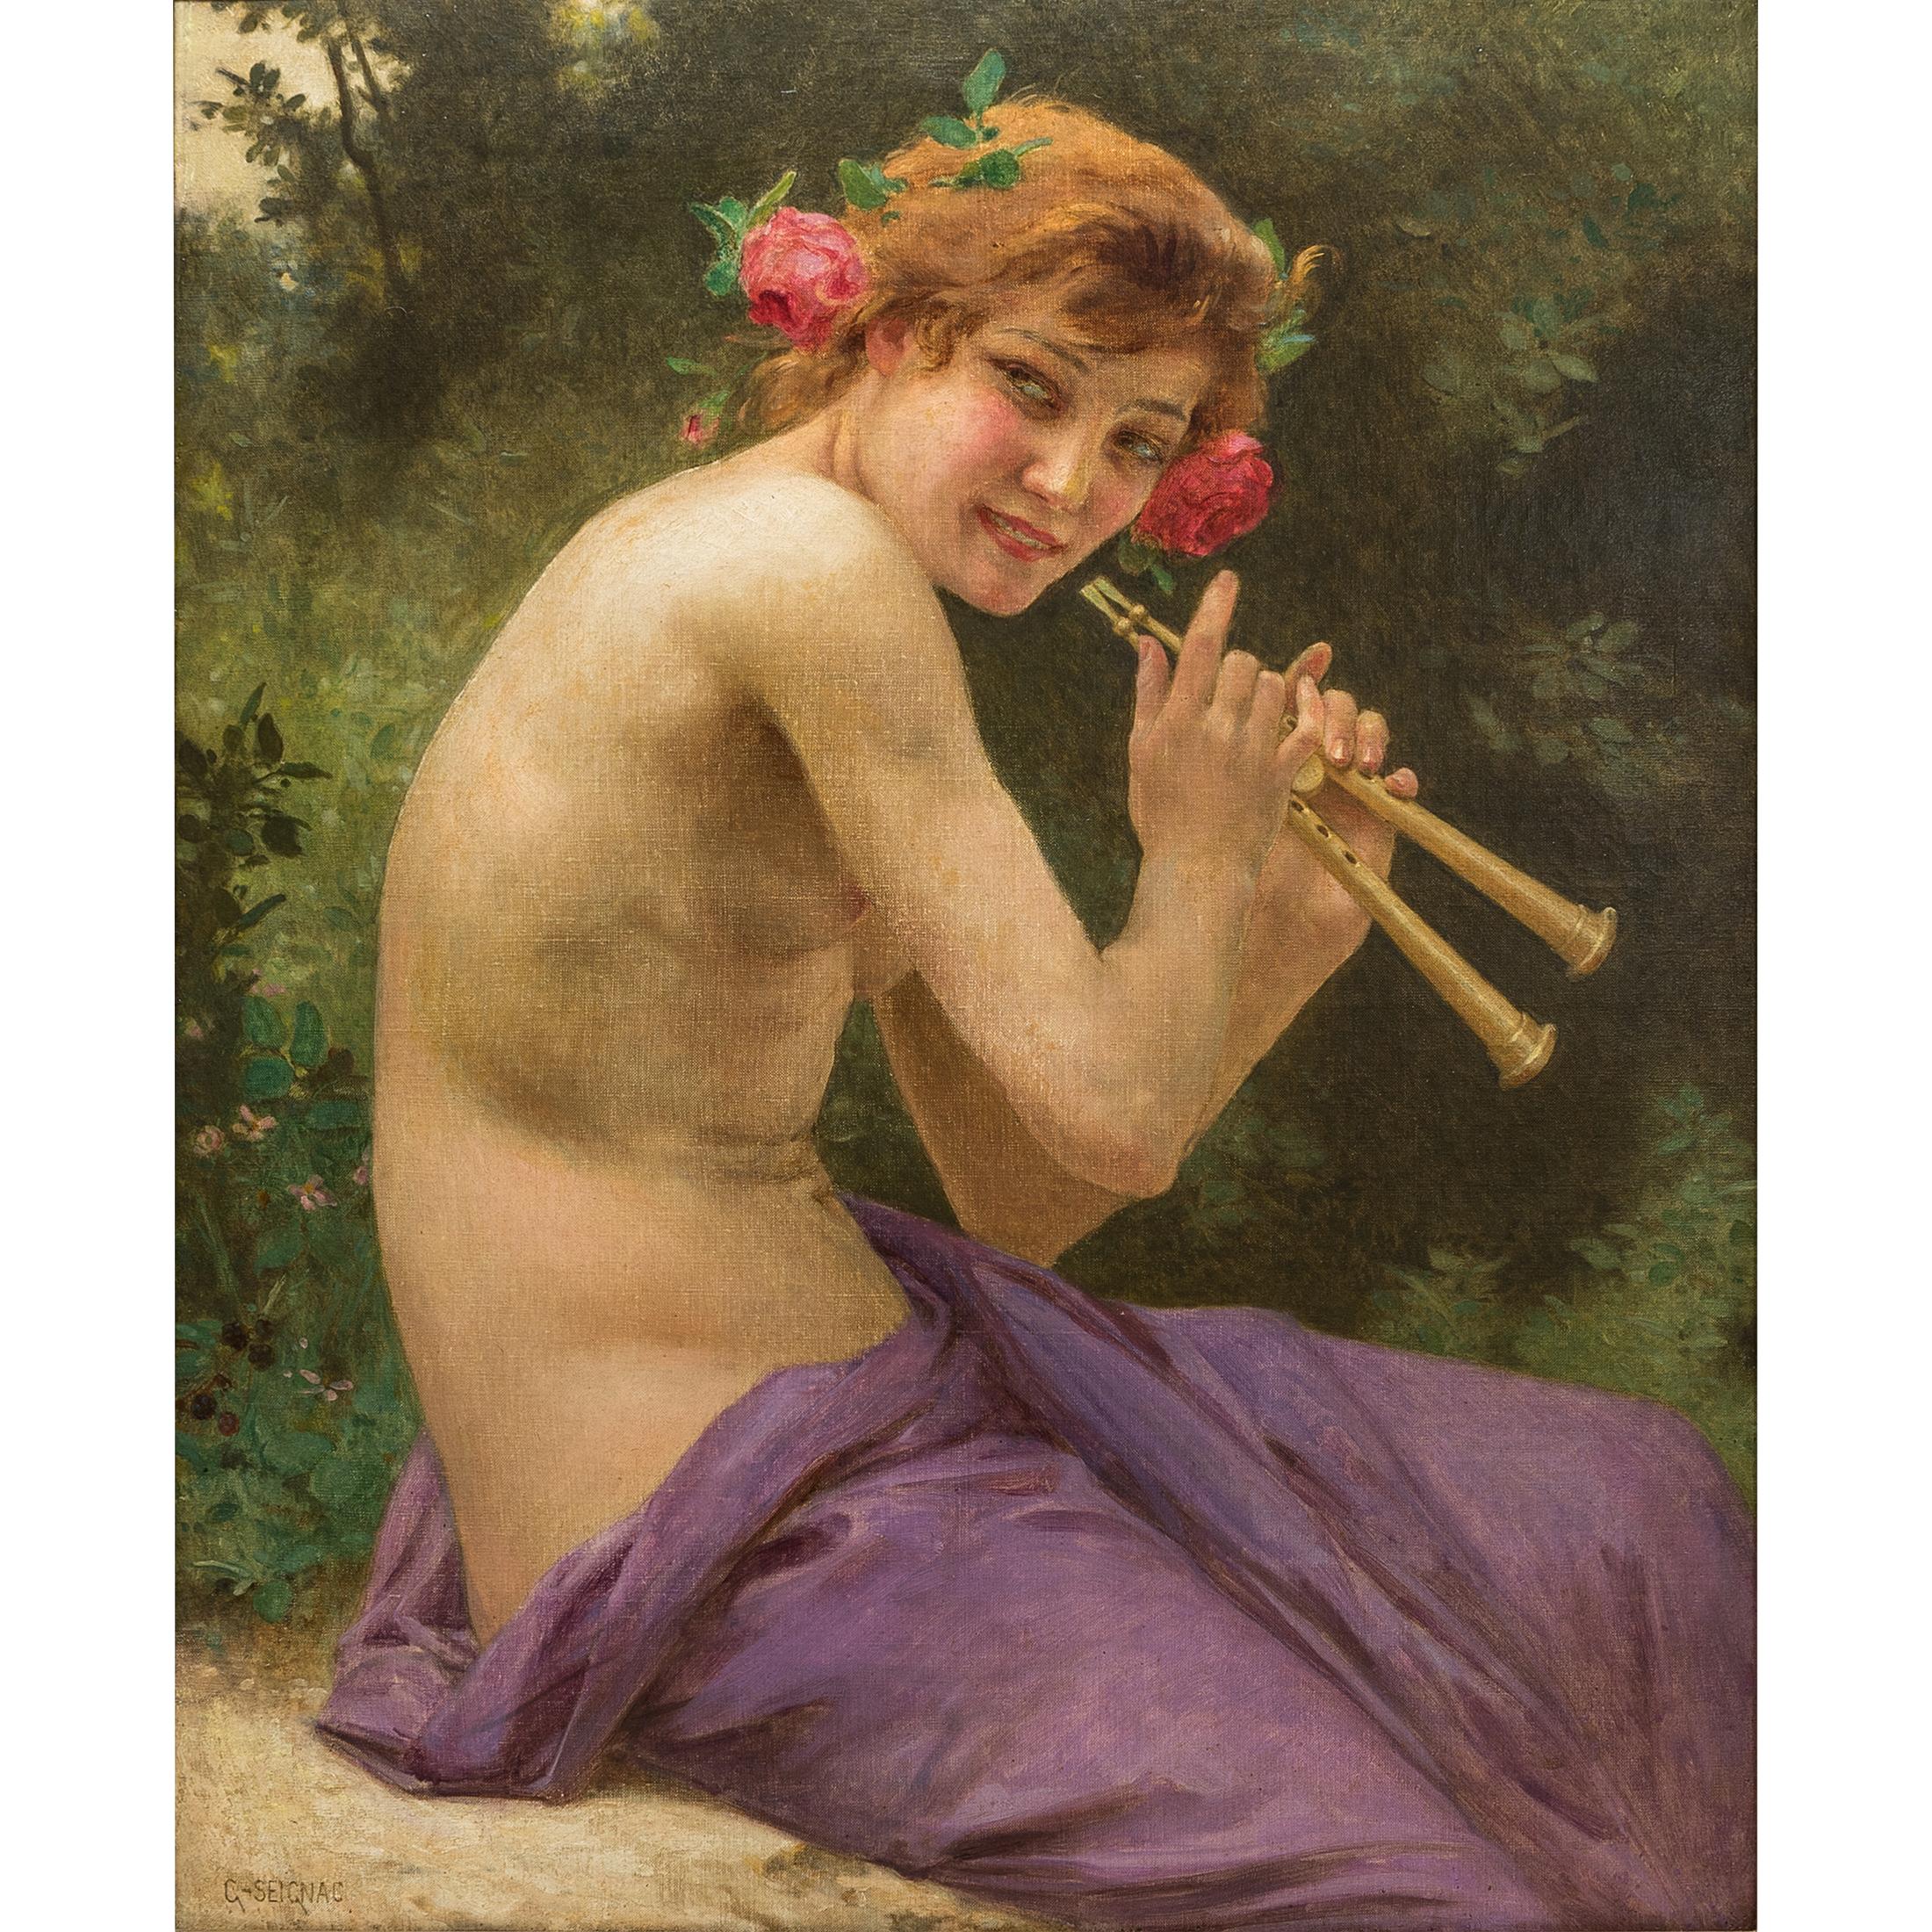 A Fine Oil Painting entitled Fuanesse by Guillaume Seignac (framed).

Title: Fuanesse
Artist: Guillaume Seignac (1870-1924)
Origin: French
Date: 19th century
Medium: Oil on canvas
Signature: signed G. Seignac (lower left)
Dimension: 32 x 26